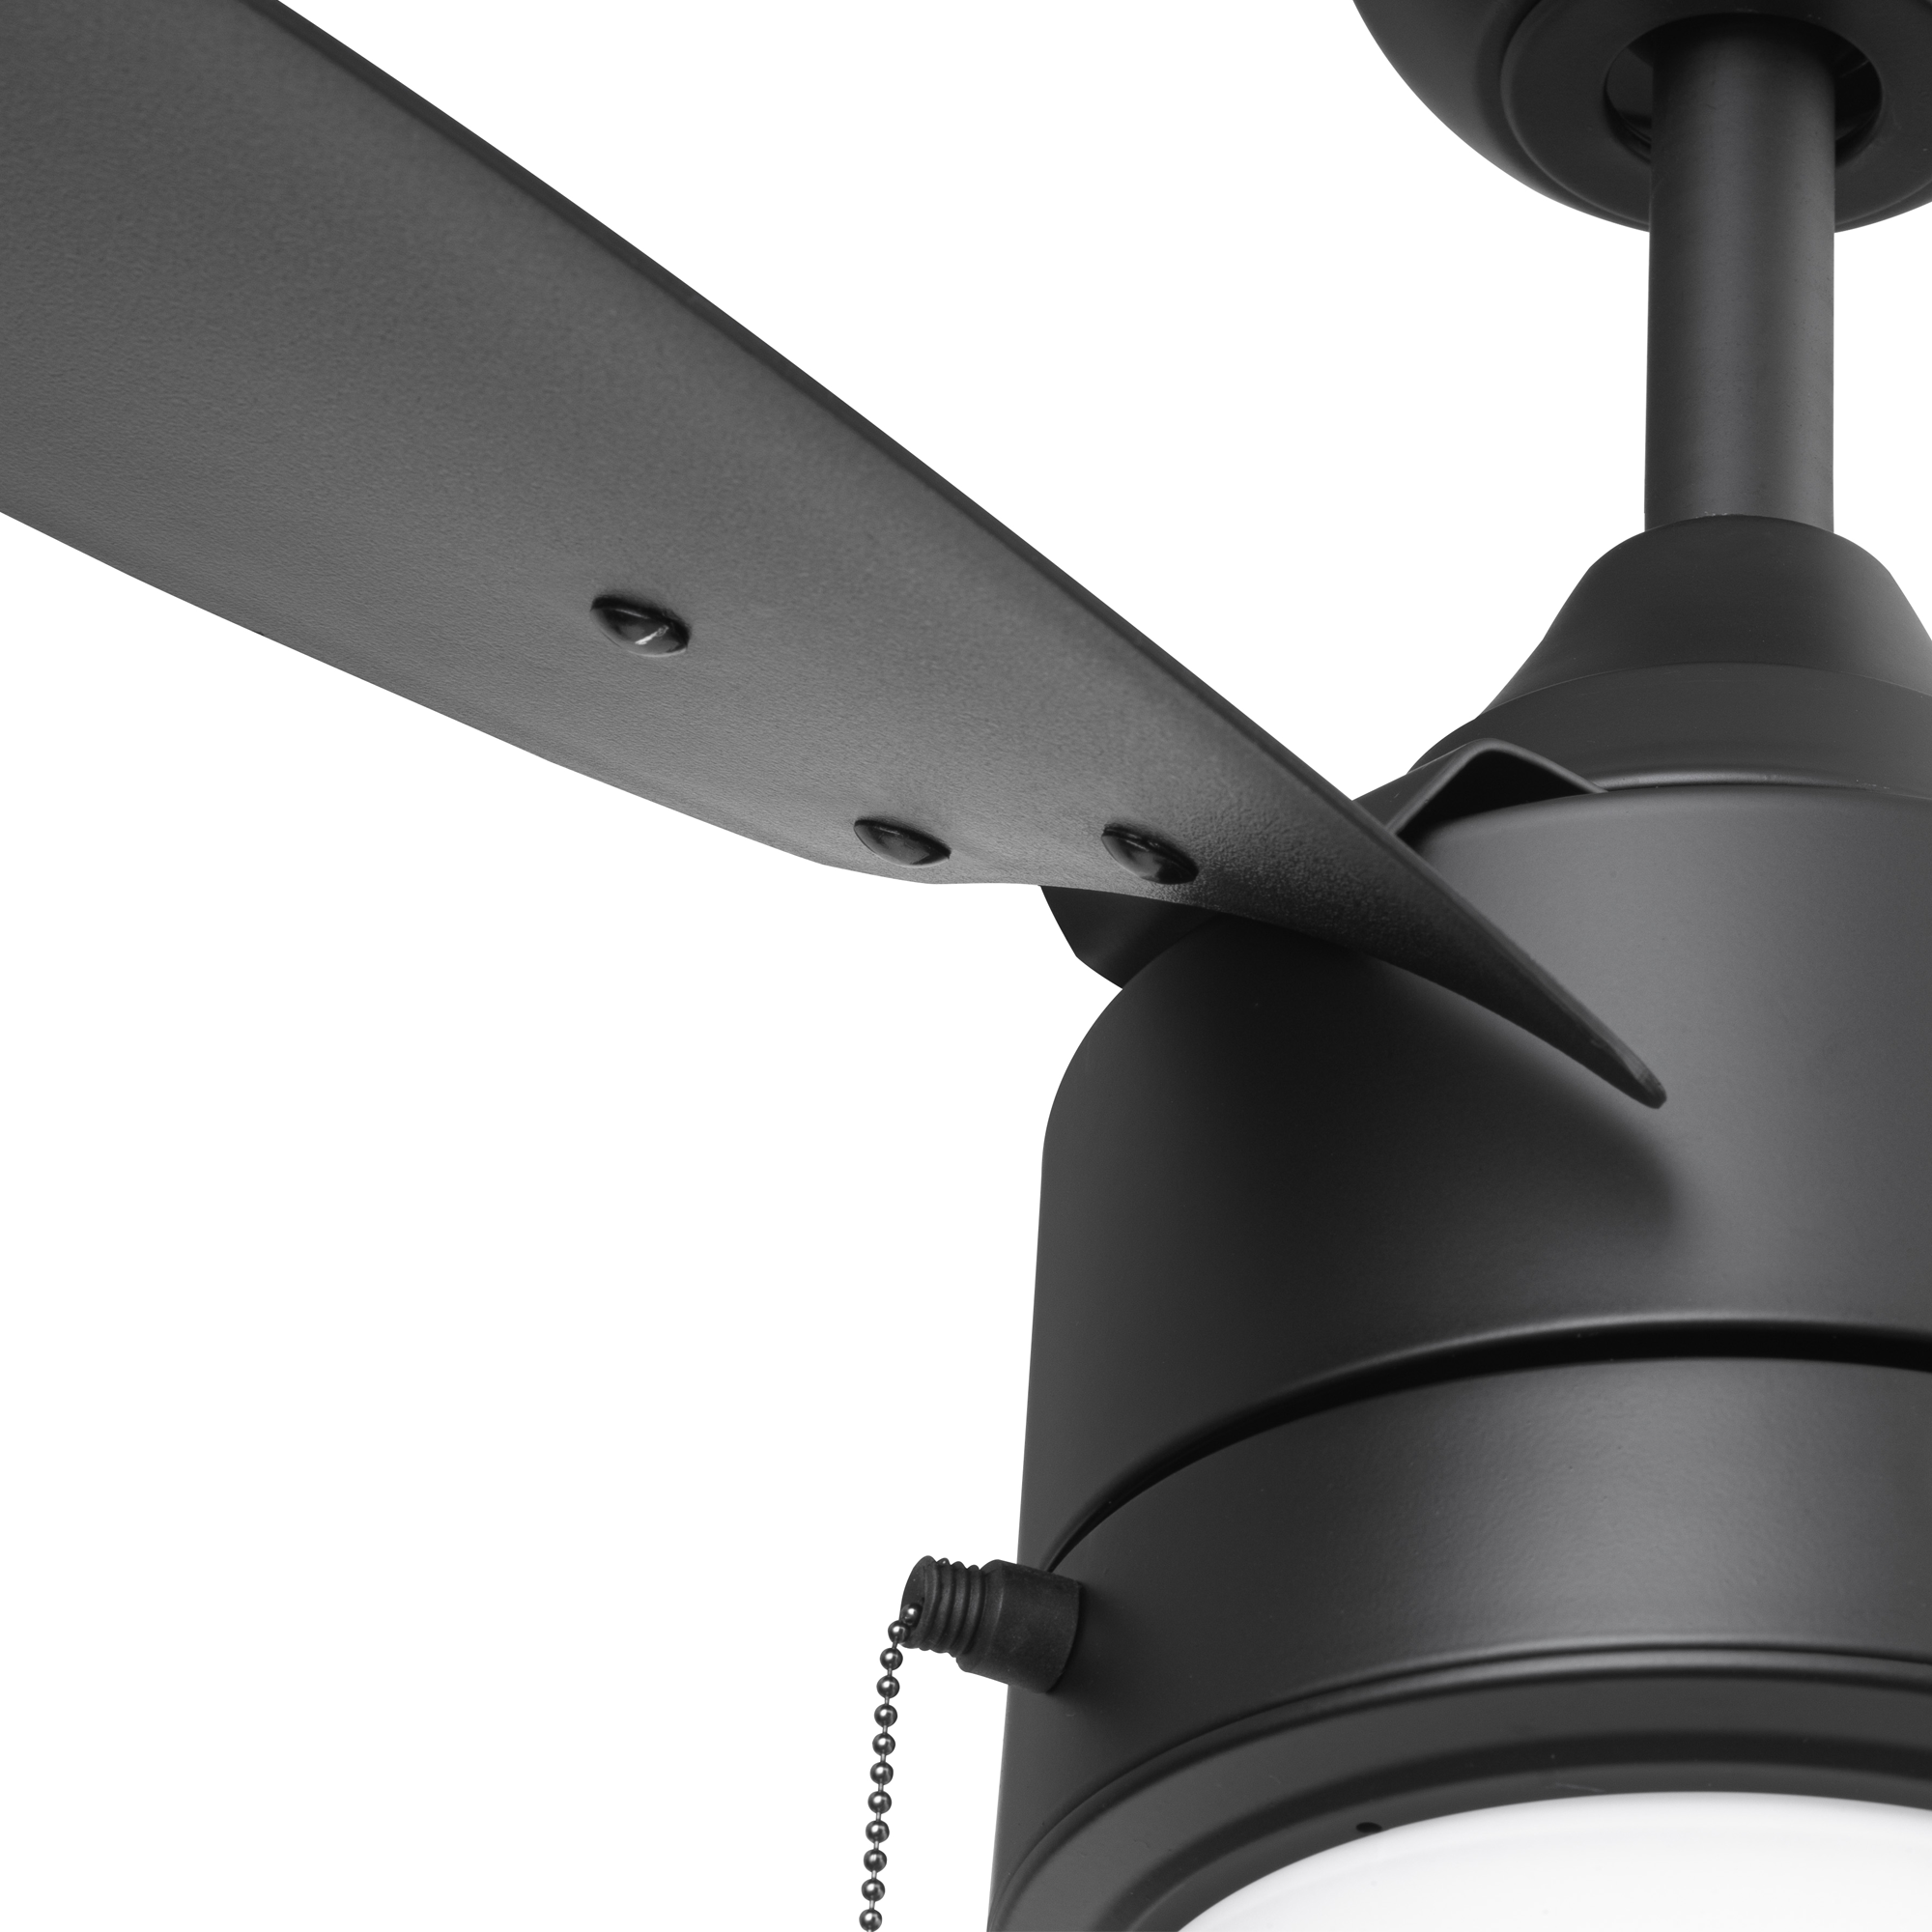 56 Inch Teo, Matte Black, Pull Chain, Indoor/Outdoor Ceiling Fan by Prominence Home